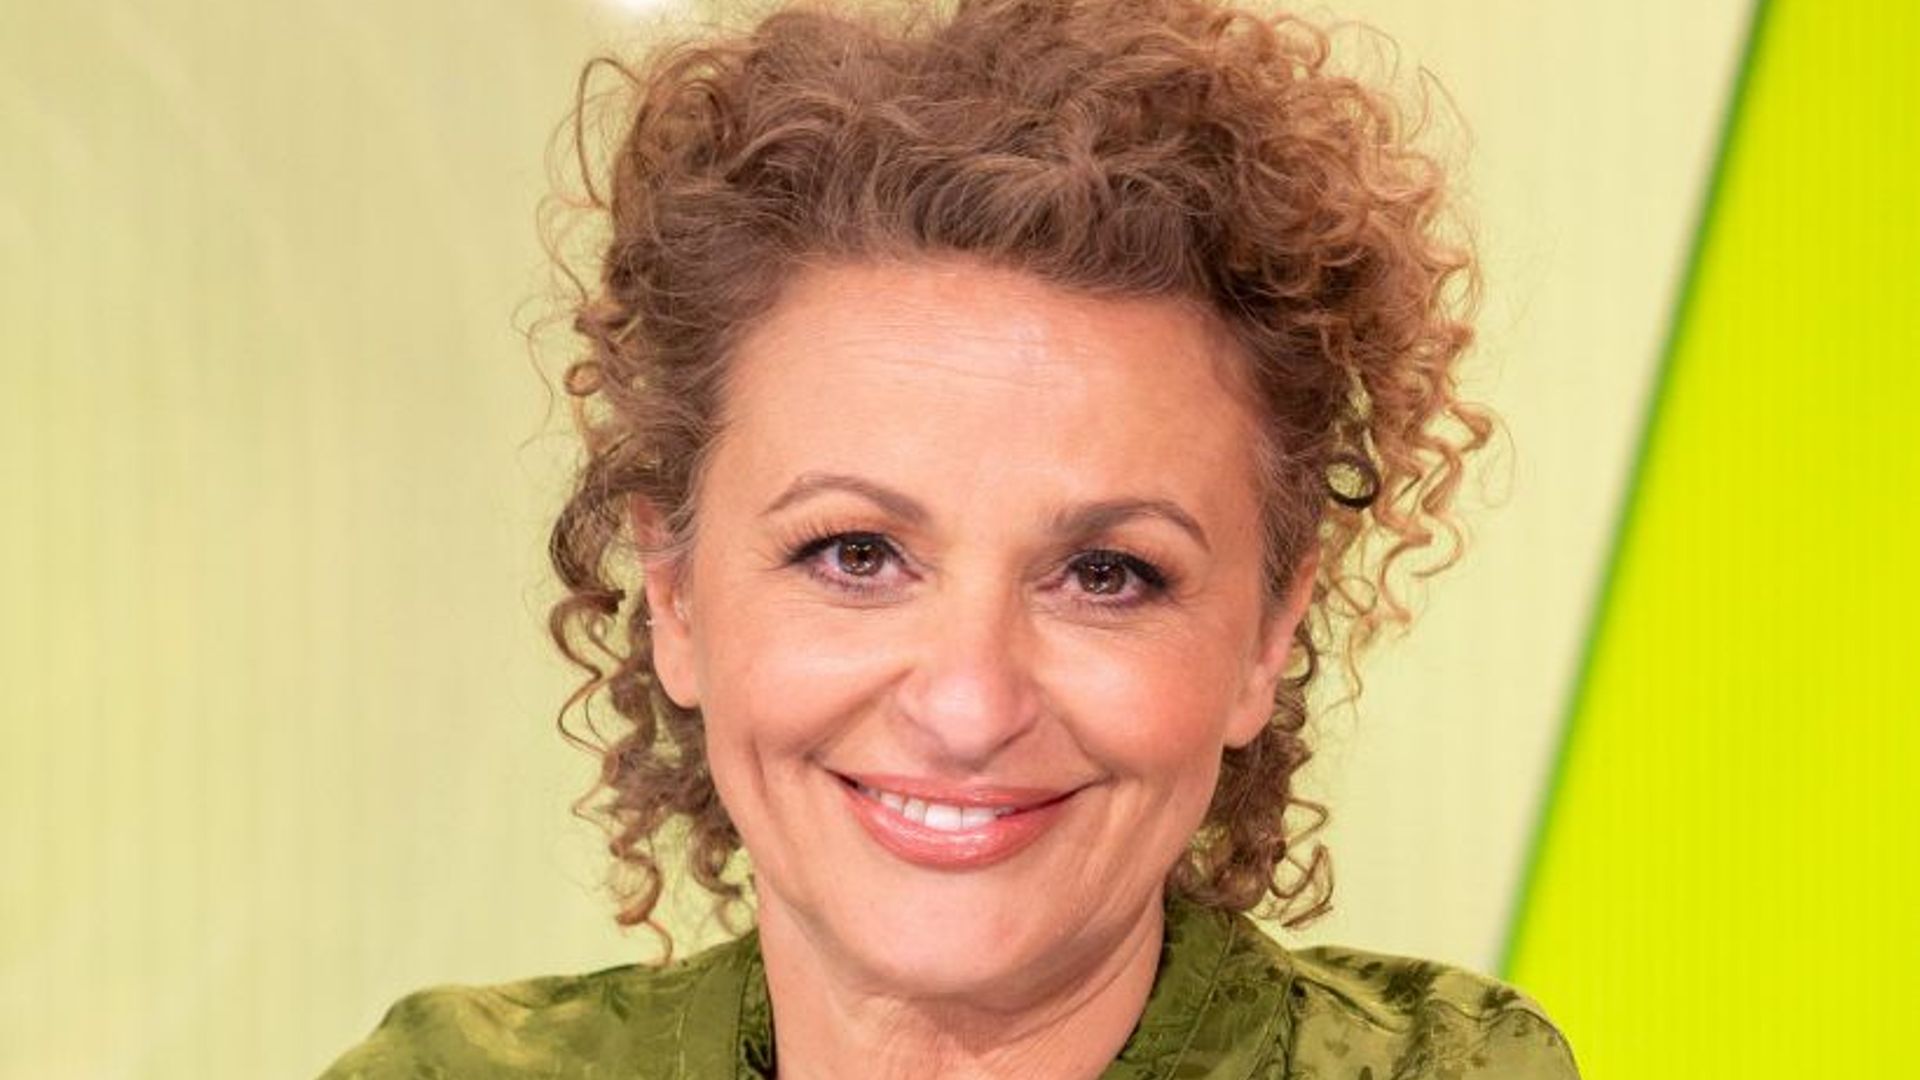 Nadia Sawalha channels her inner Britney Spears - and the results are hilarious